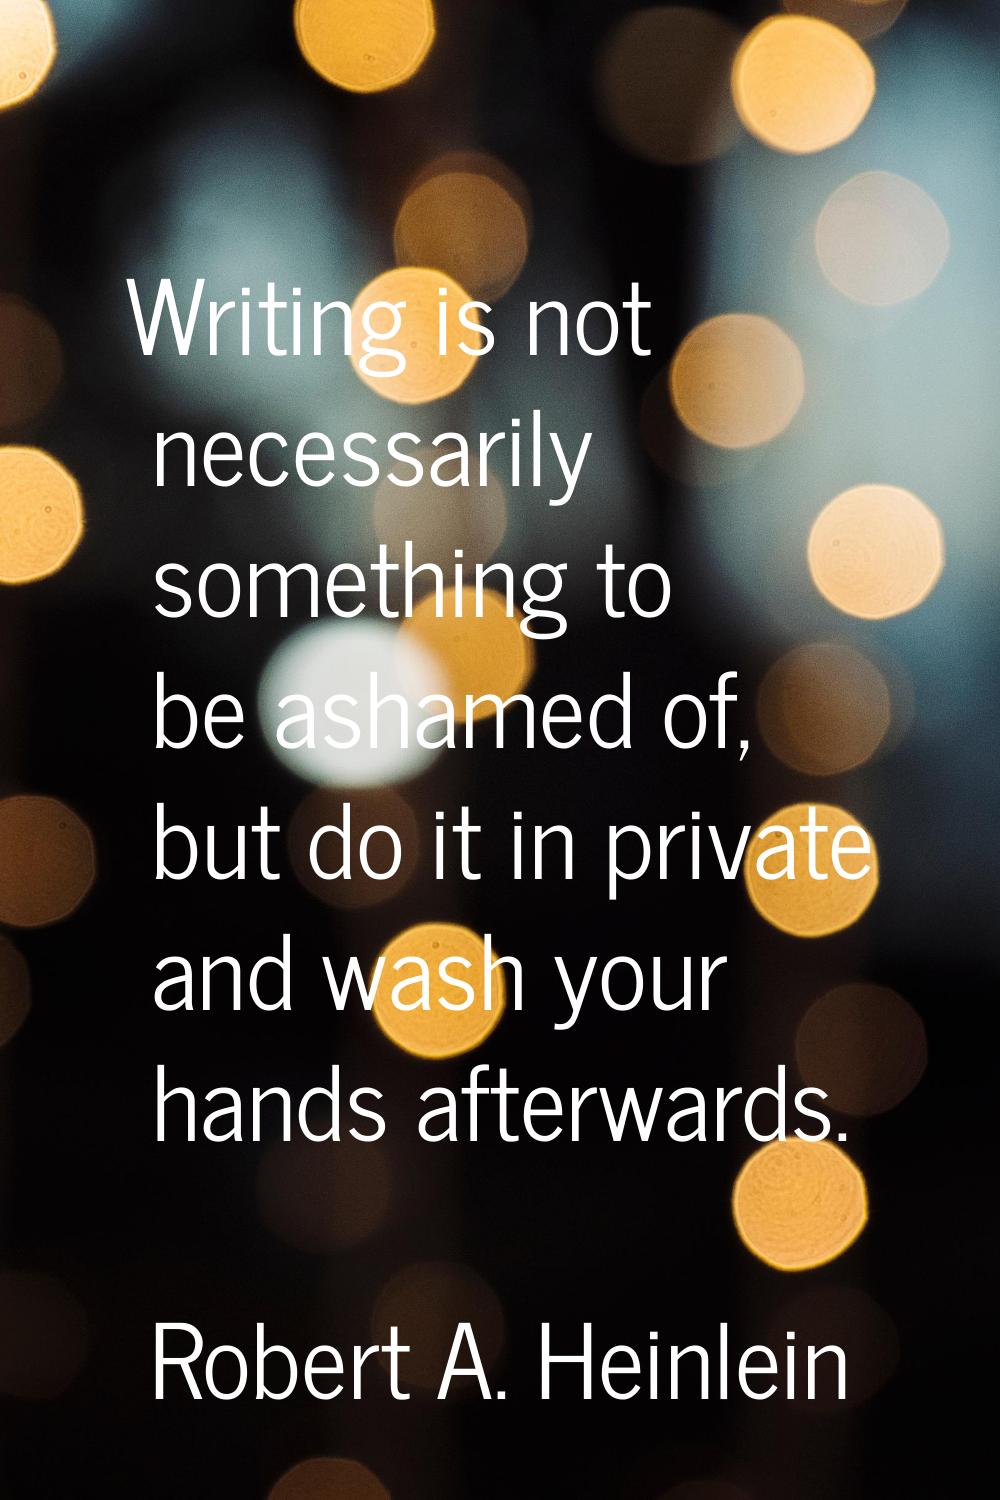 Writing is not necessarily something to be ashamed of, but do it in private and wash your hands aft